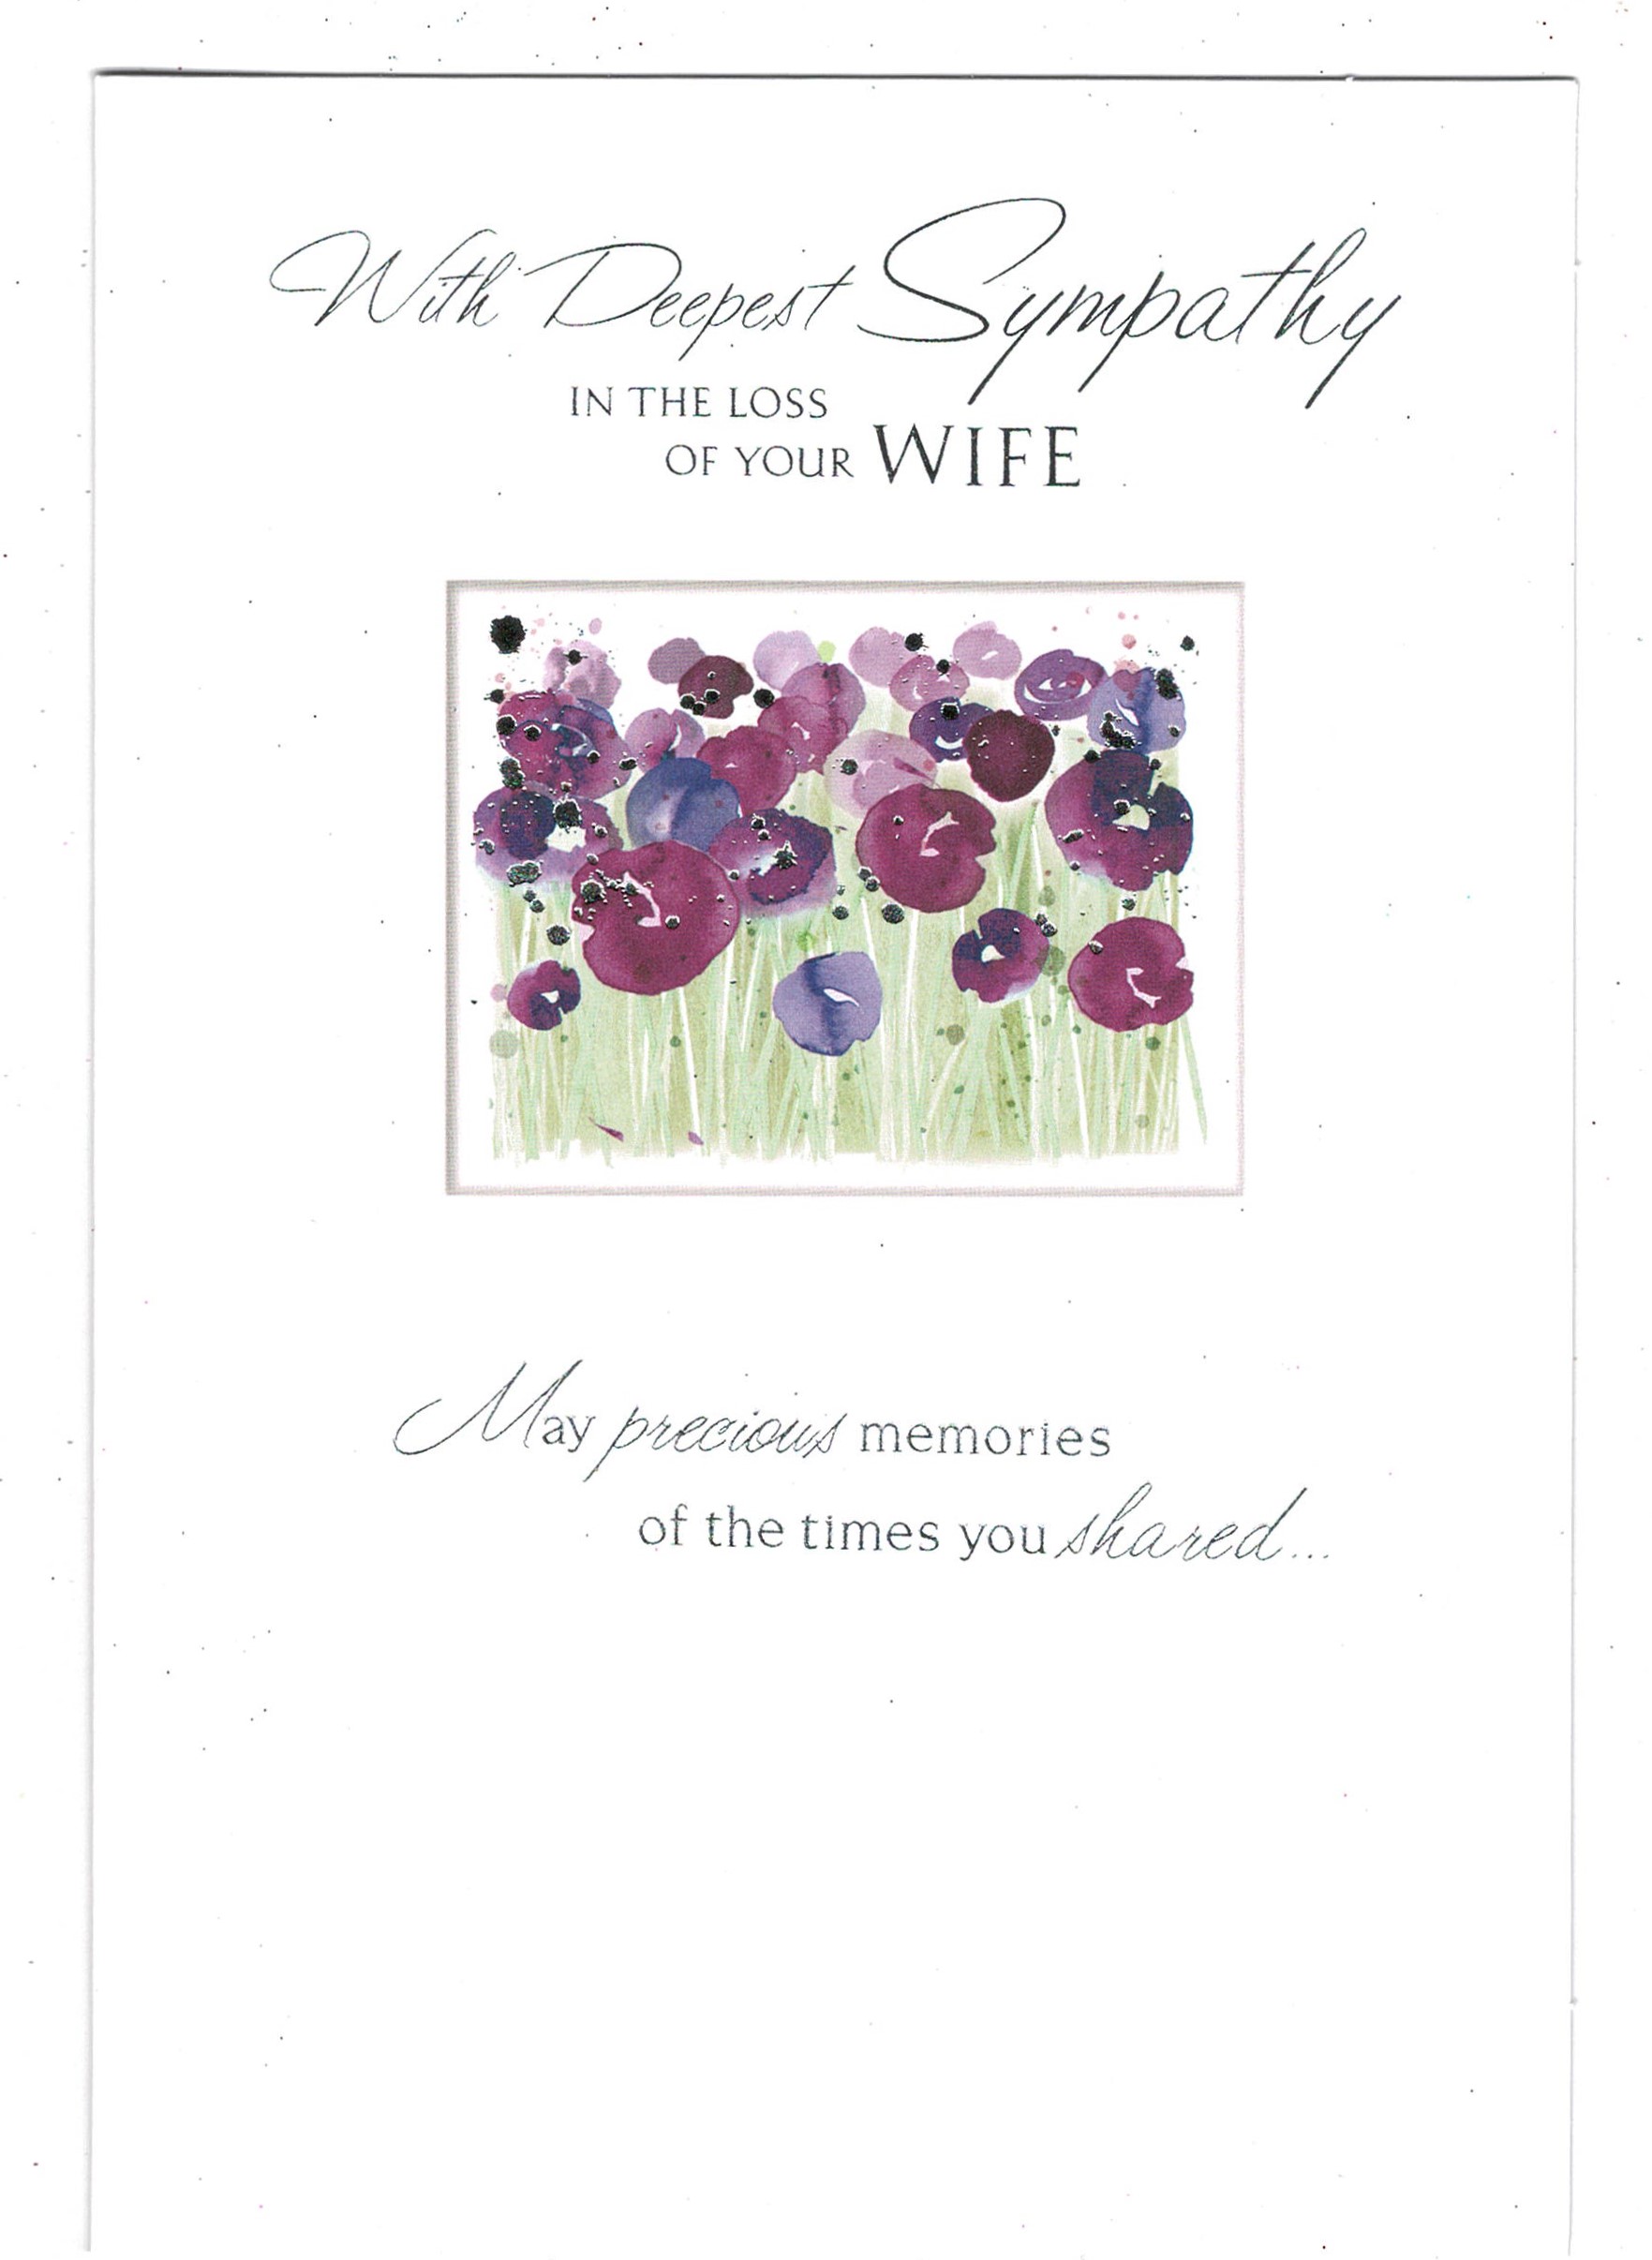 Wife Sympathy Card With Deepest Sympathy In The Loss Of Your Wife